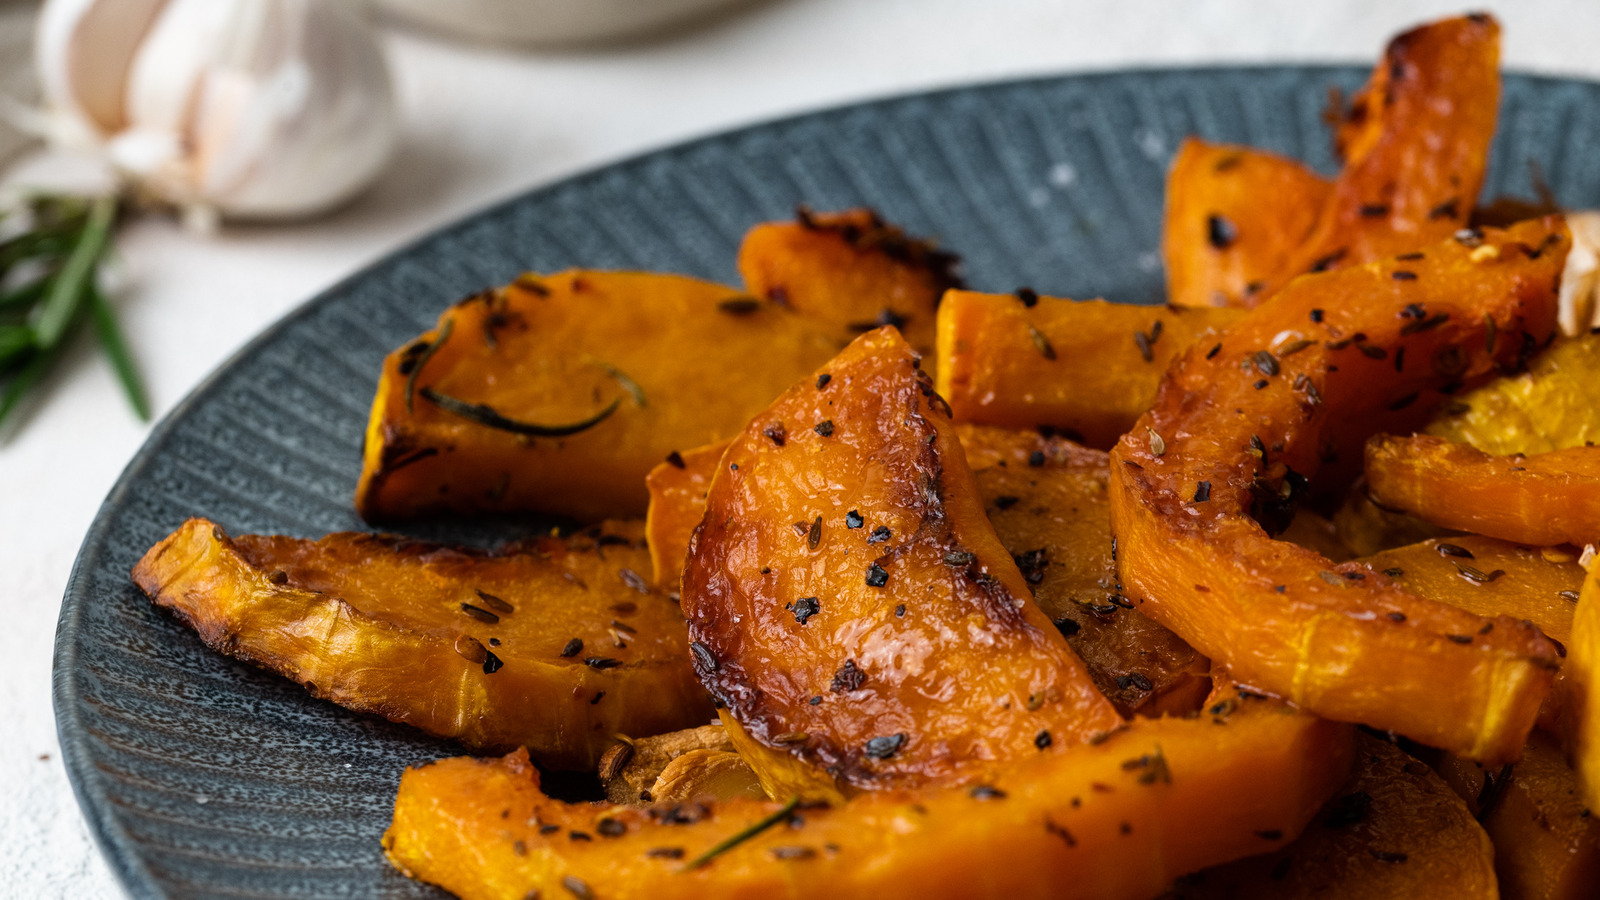 Spiced Baked Butternut Squash Recipe - Tasting Table